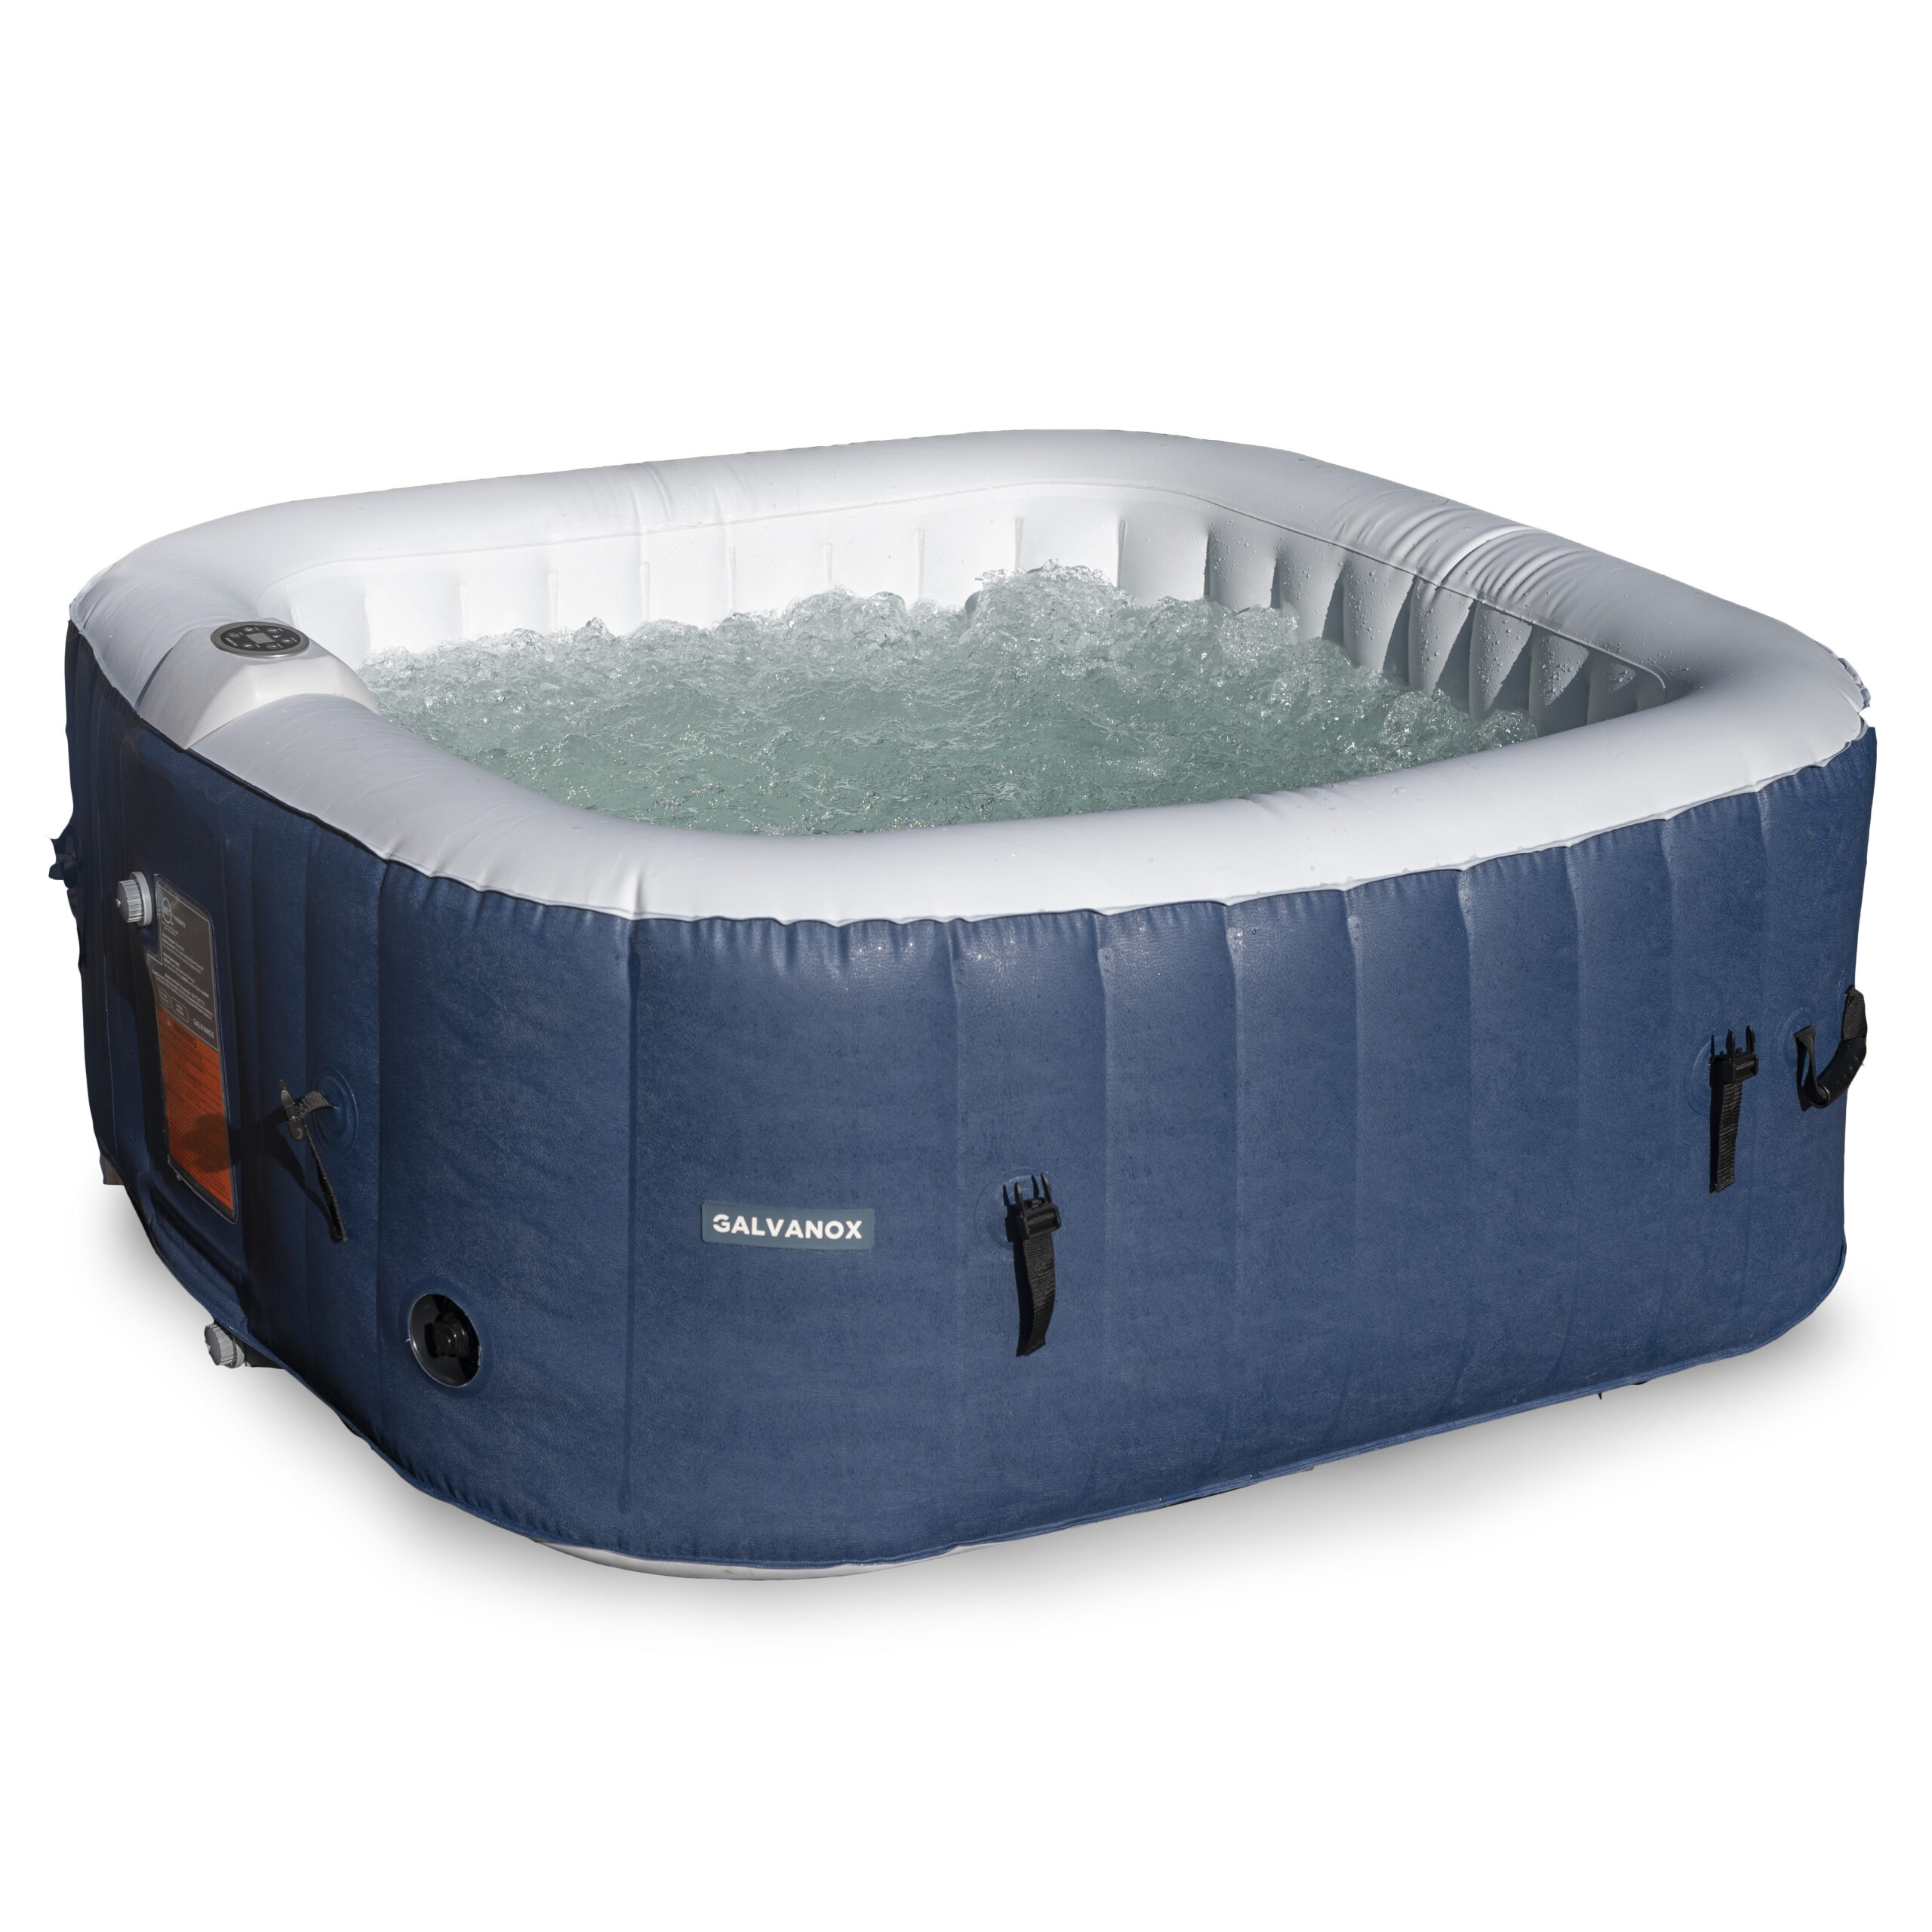 Inflatable 4 6 Person Hot Tub Encased